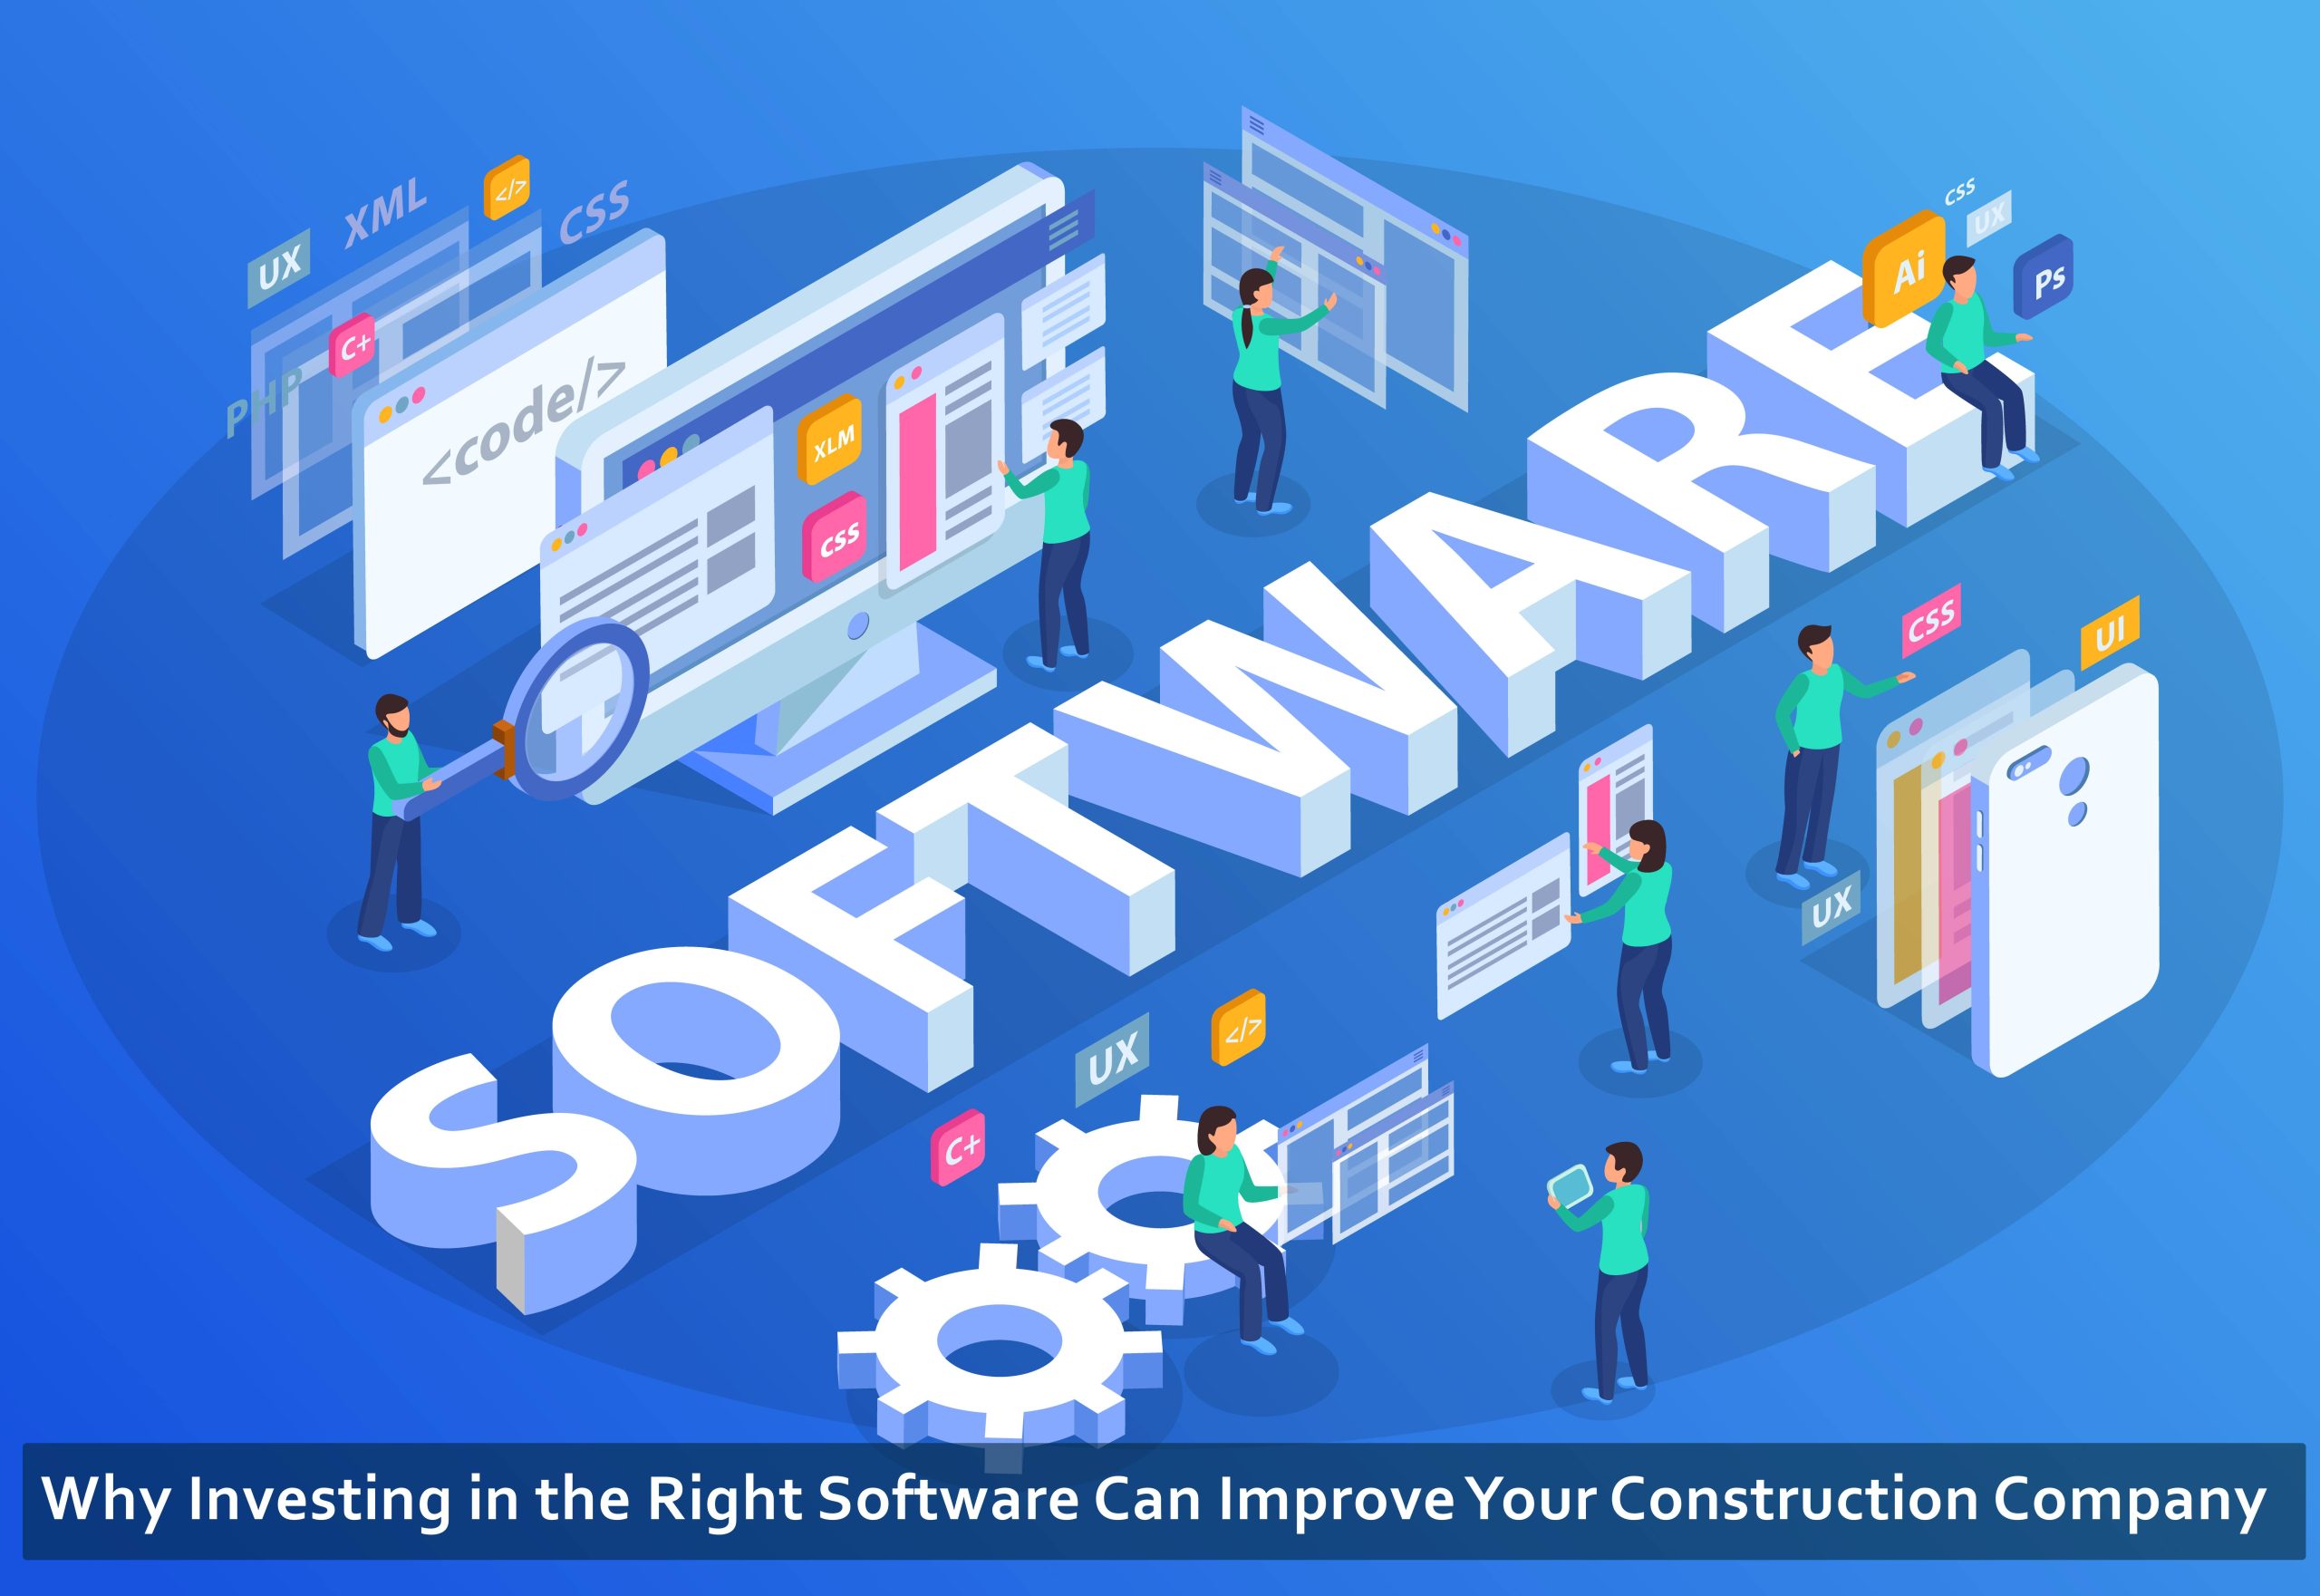 Why Investing in the Right Software Can Improve Your Construction Company